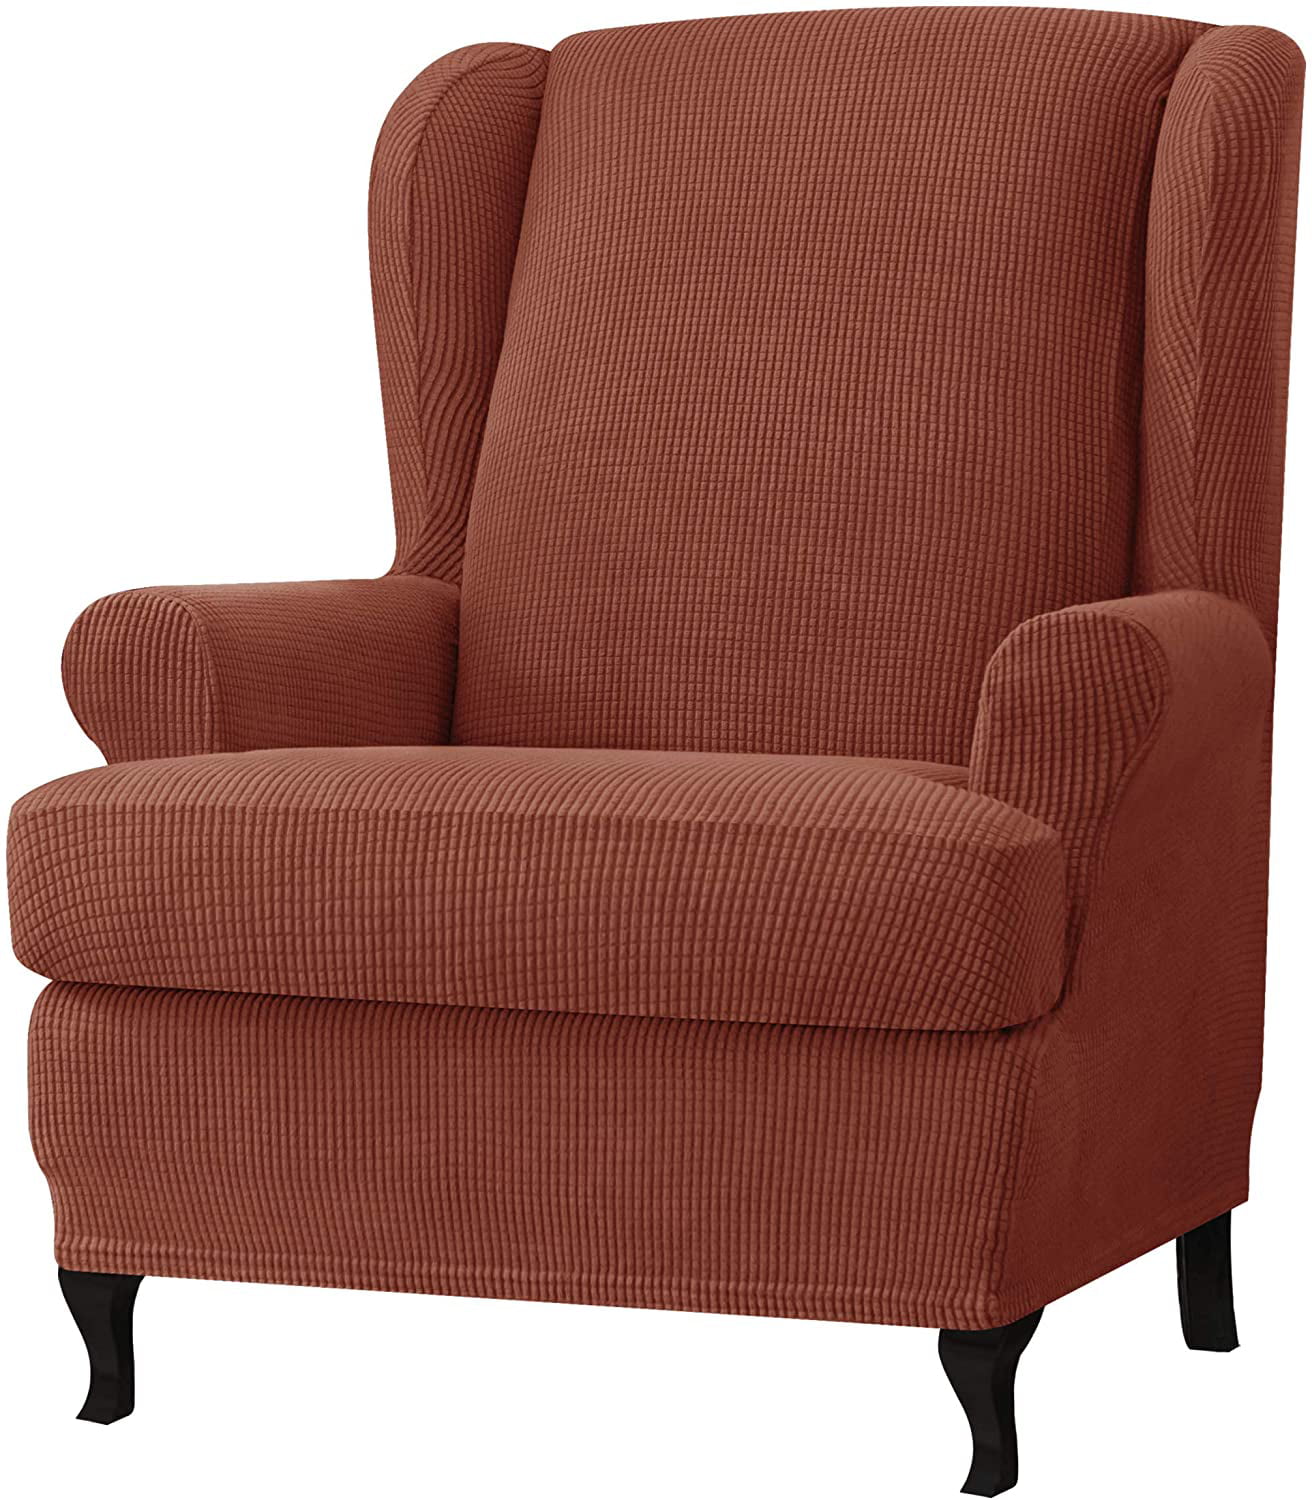 Details about   US Elastic Wing Chair Covers Protector Wing Back Armchair Seater Slipcover Decor 